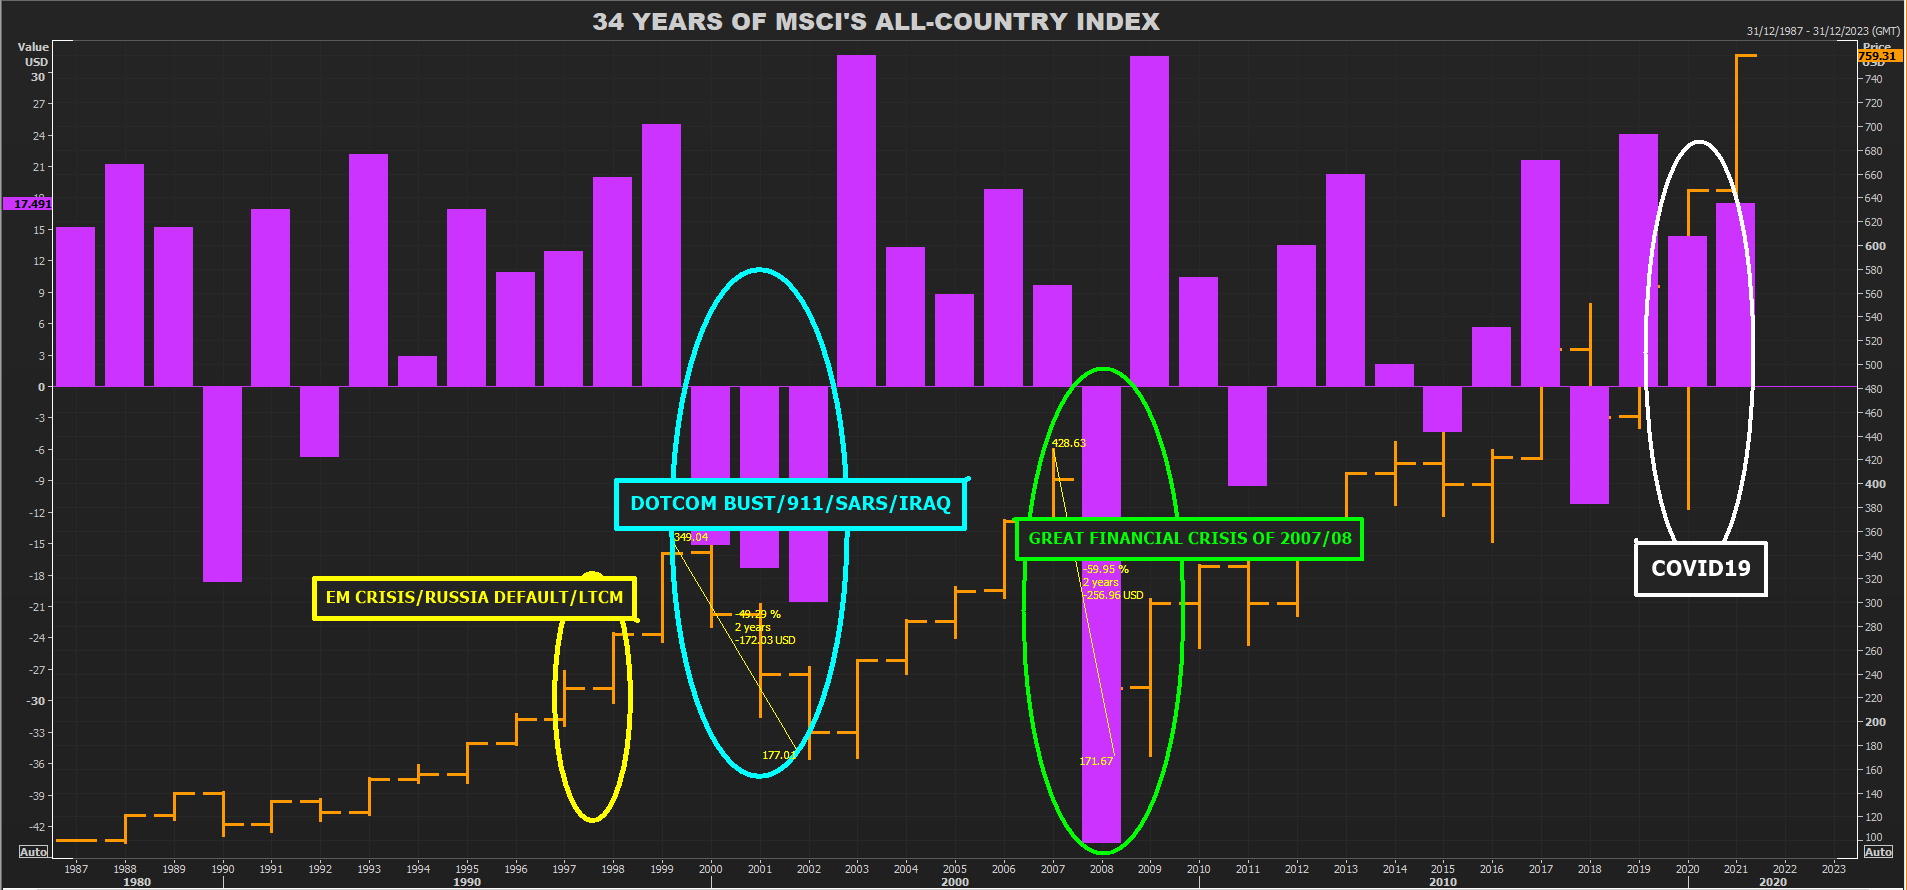 34 years of MSCI's all-country index